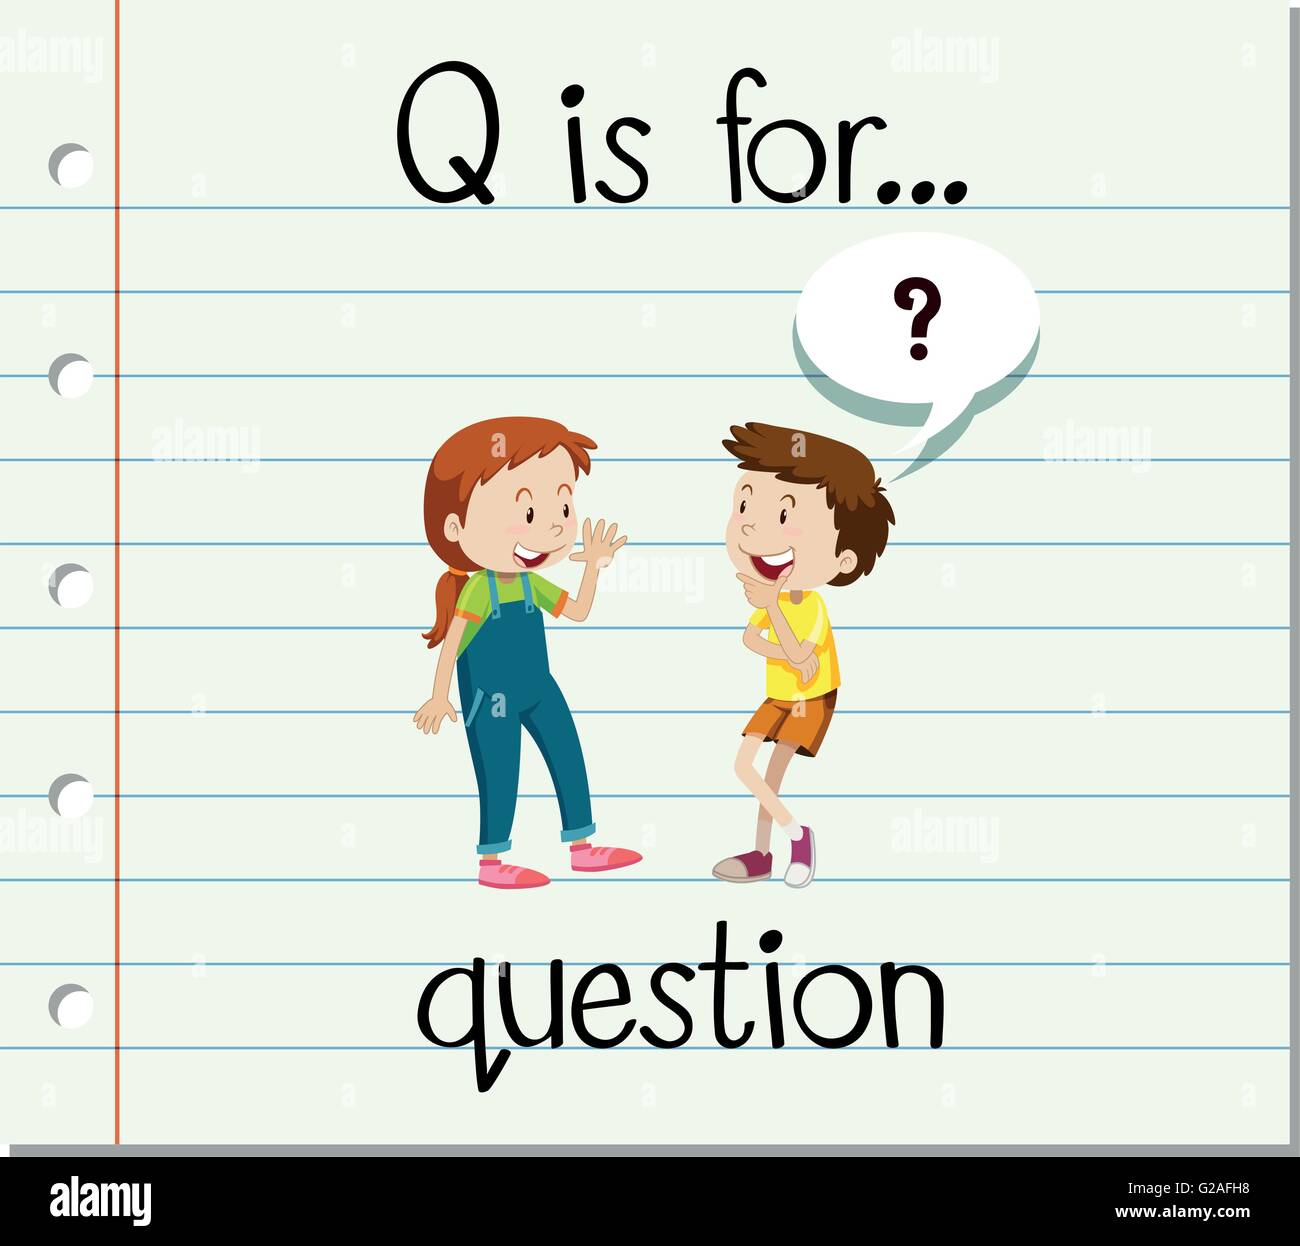 Flashcard letter Q is for question illustration Stock Vector